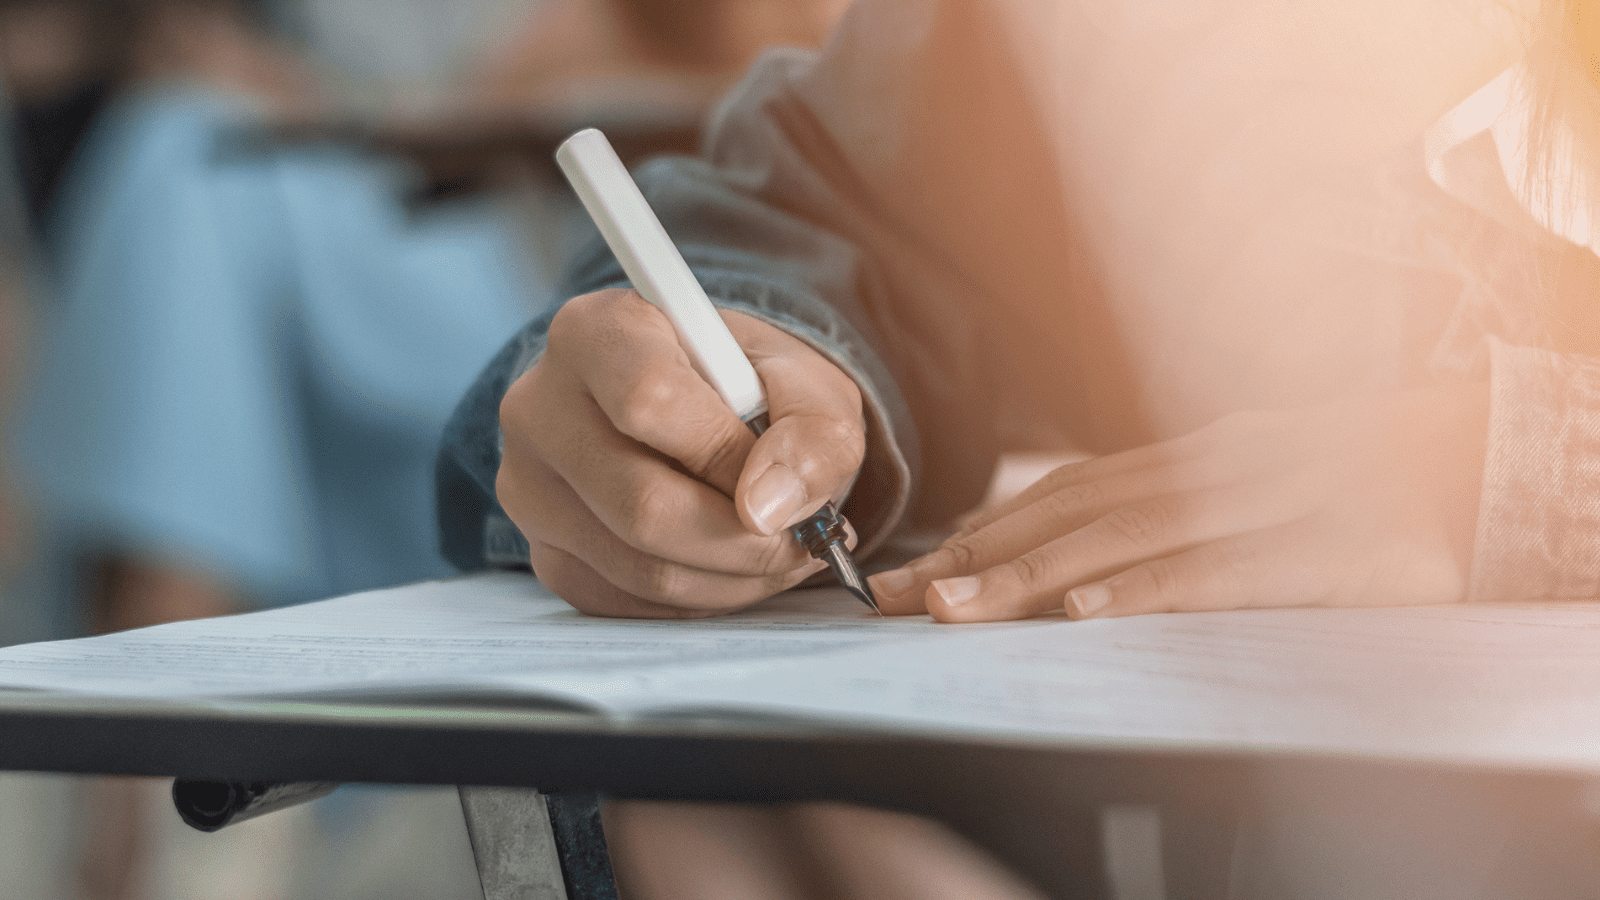 A person sits at a desk writing in a jotter